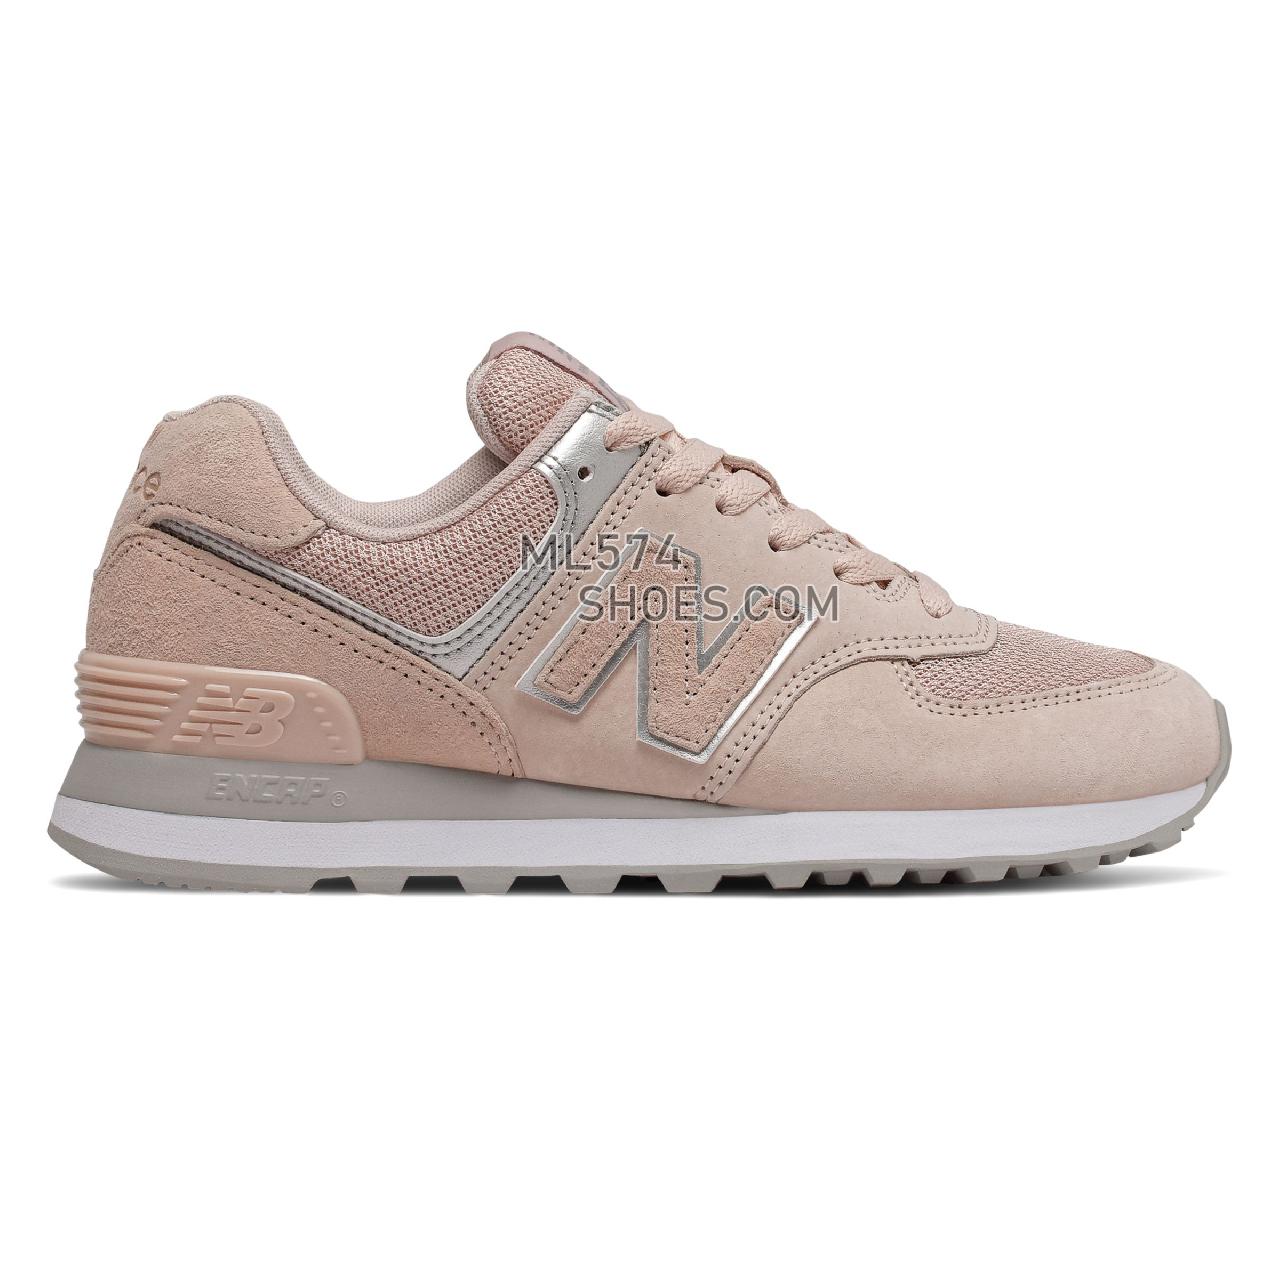 New Balance 574 - Women's Classic Sneakers - Smoked Salt with Silver - WL574EQ